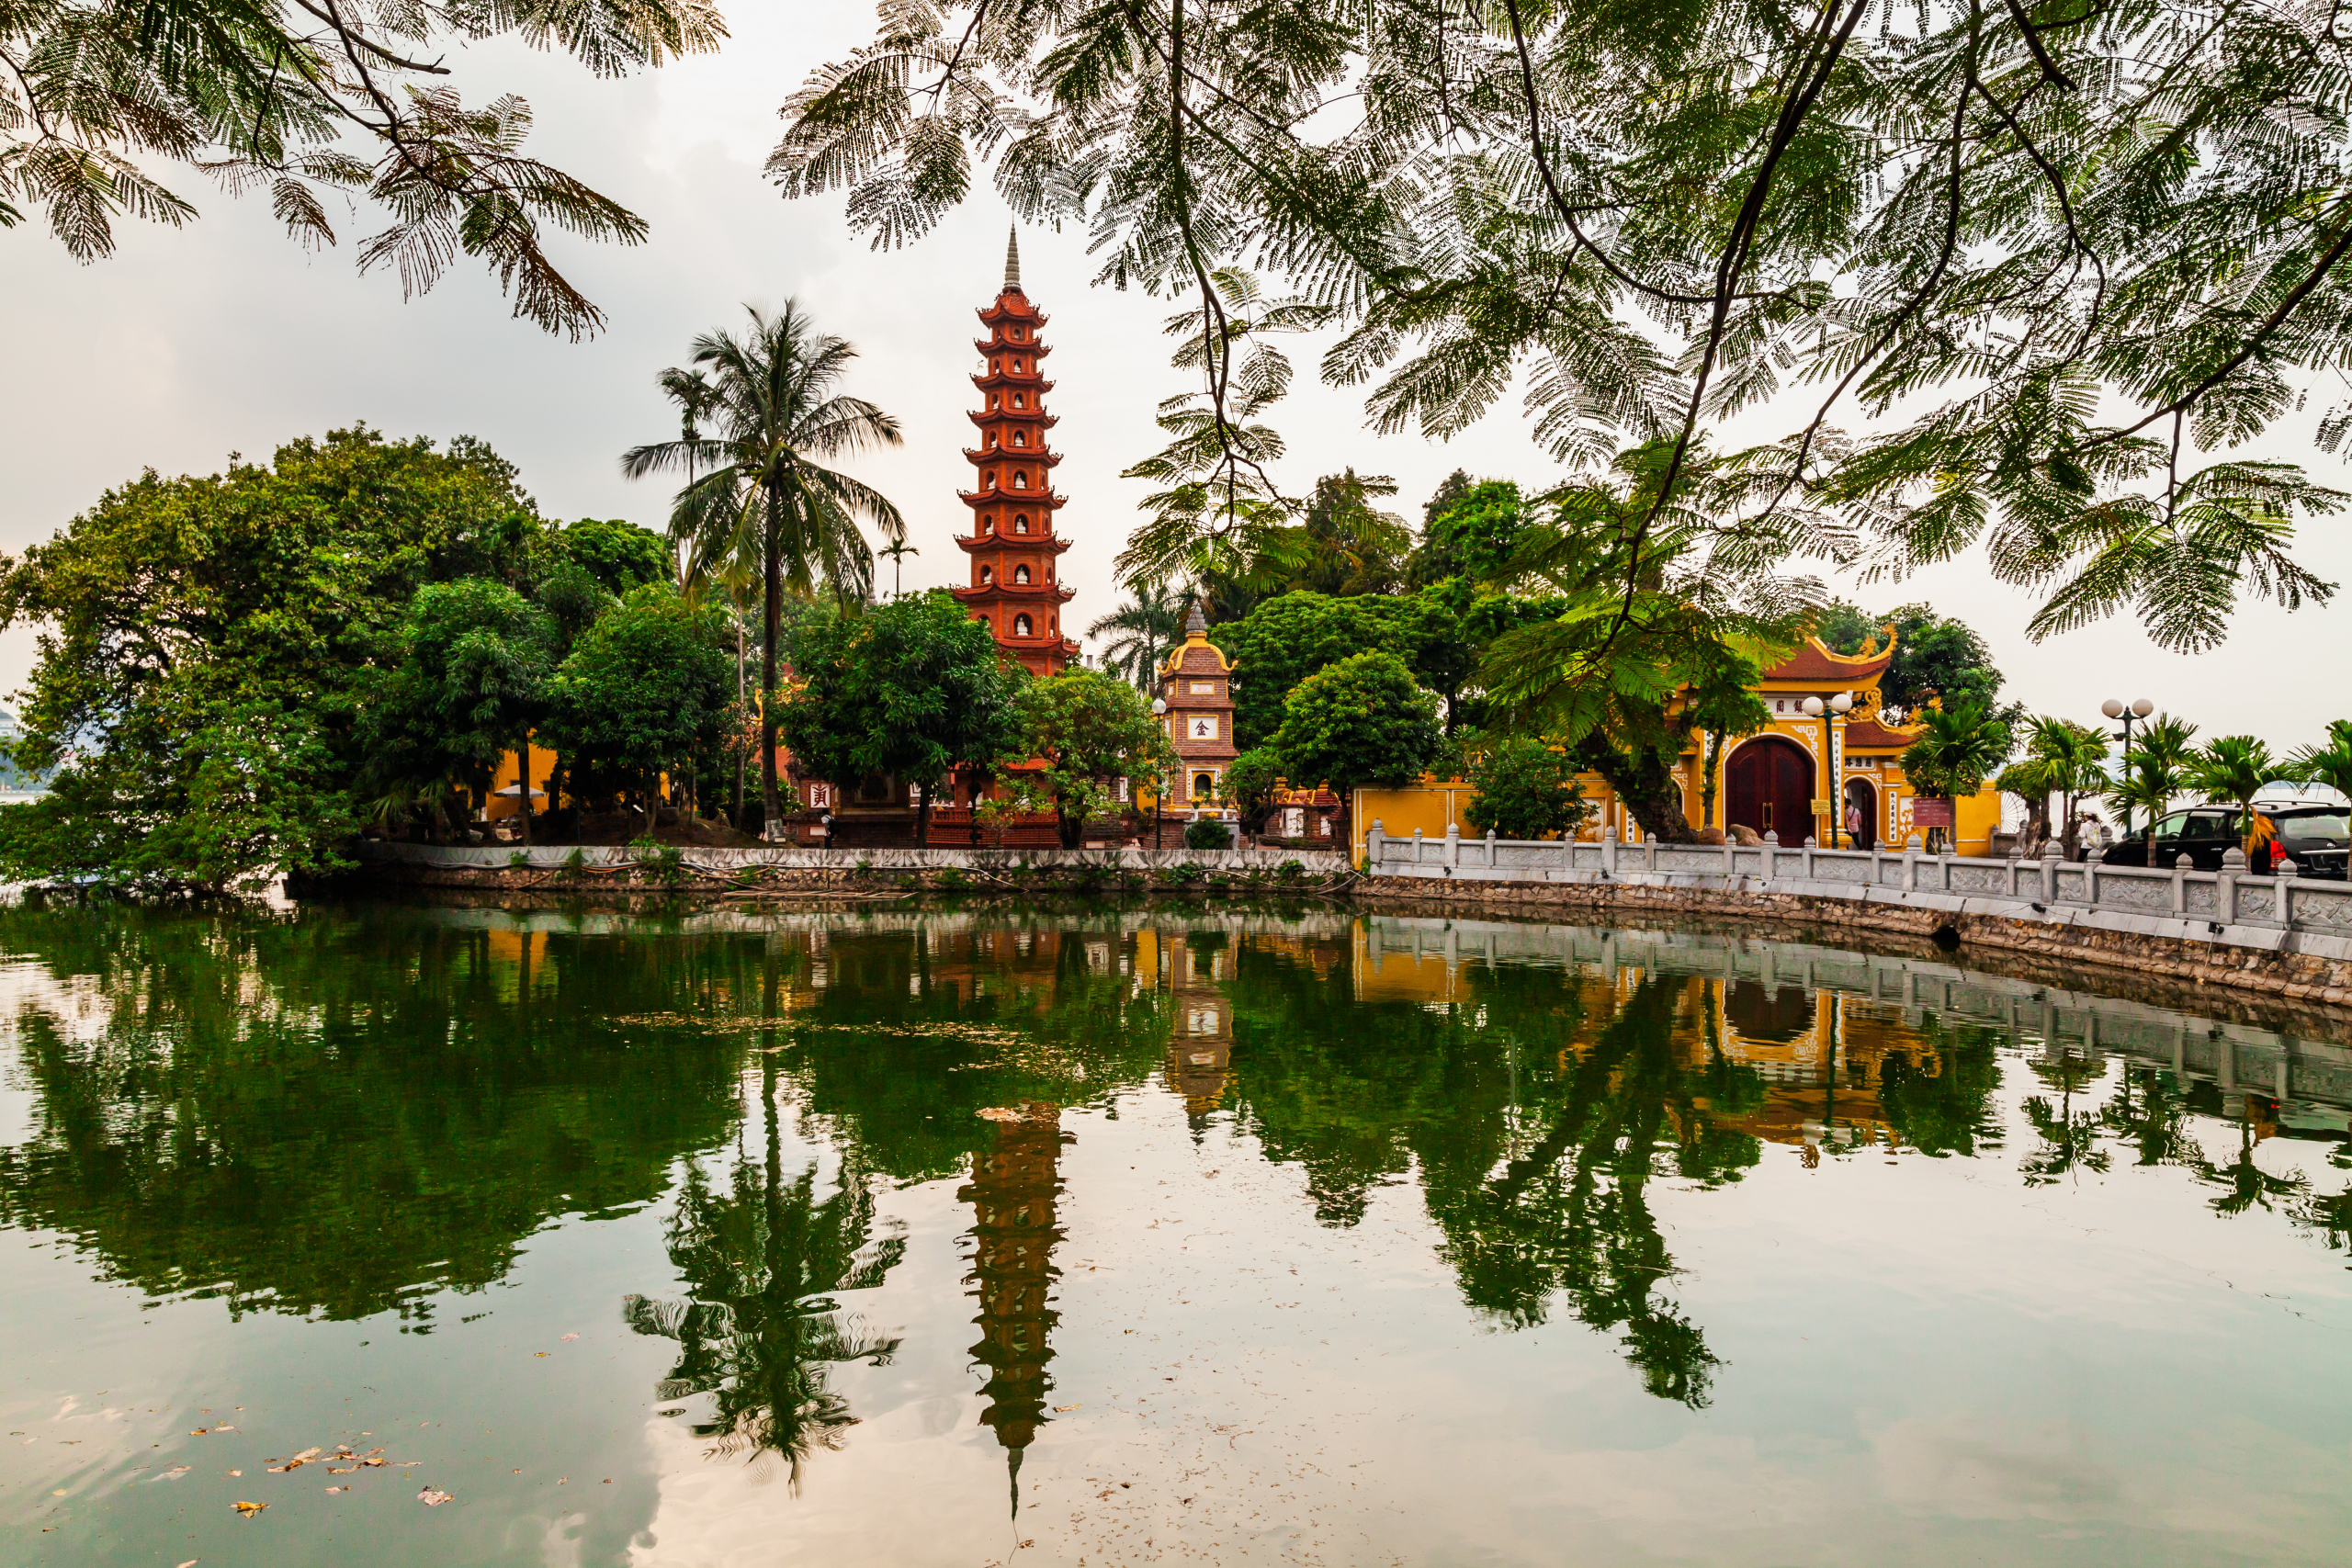 Tran Quoc pagoda in the morning, the oldest temple in Hanoi, Vietnam. Hanoi cityscape